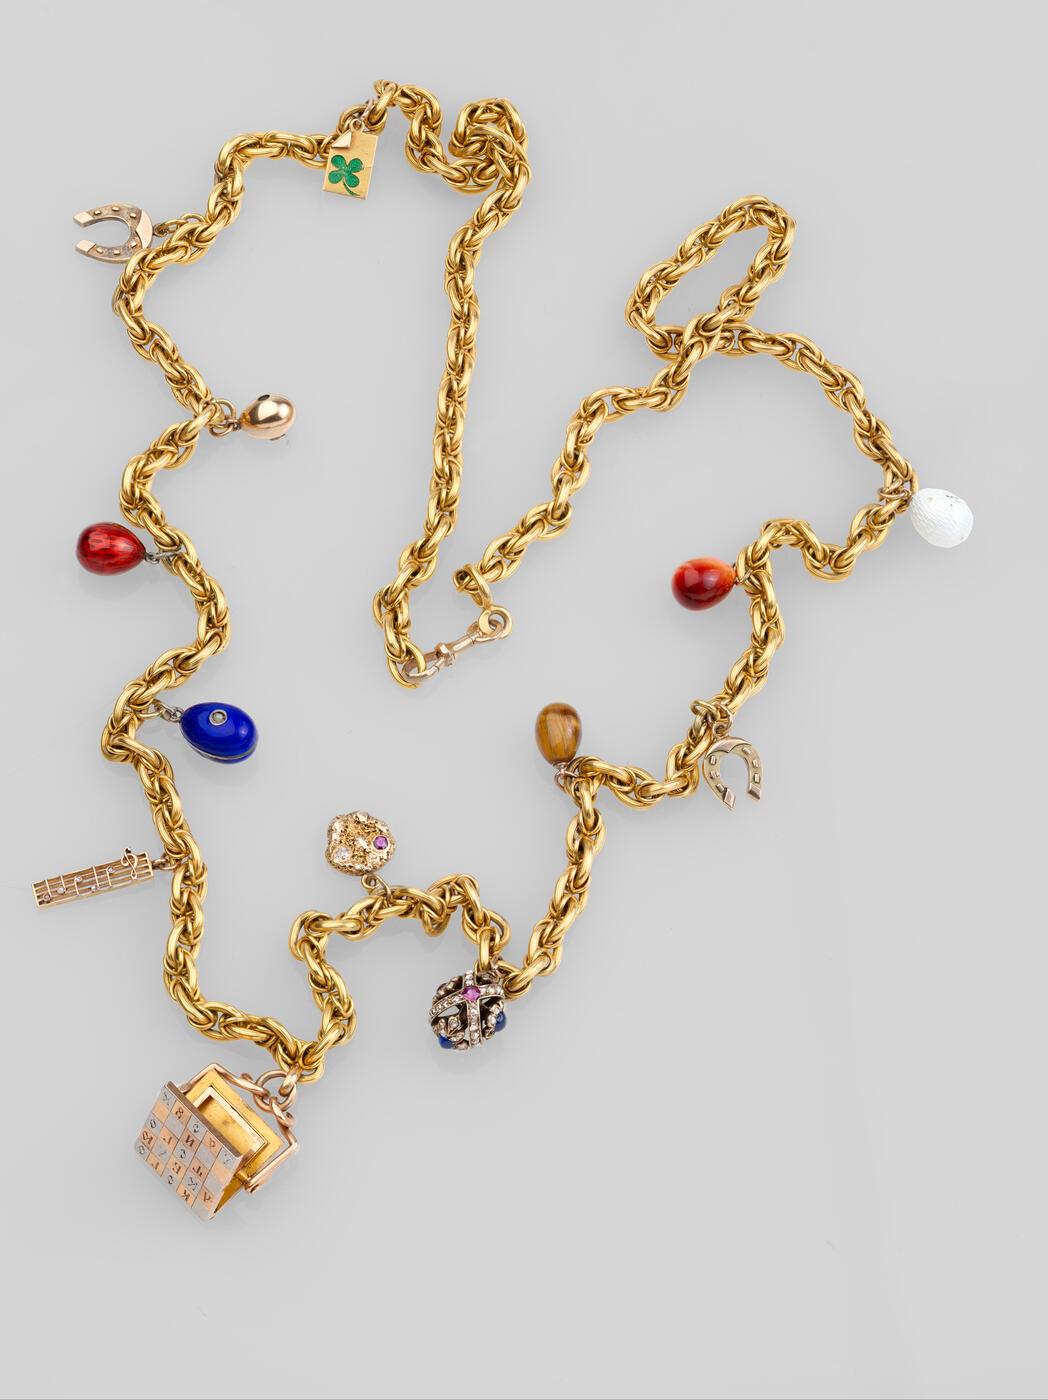 Thirteen Charms including a Fabergé Egg Pendant and a Commemorative Photograph Frame on Gold Chain